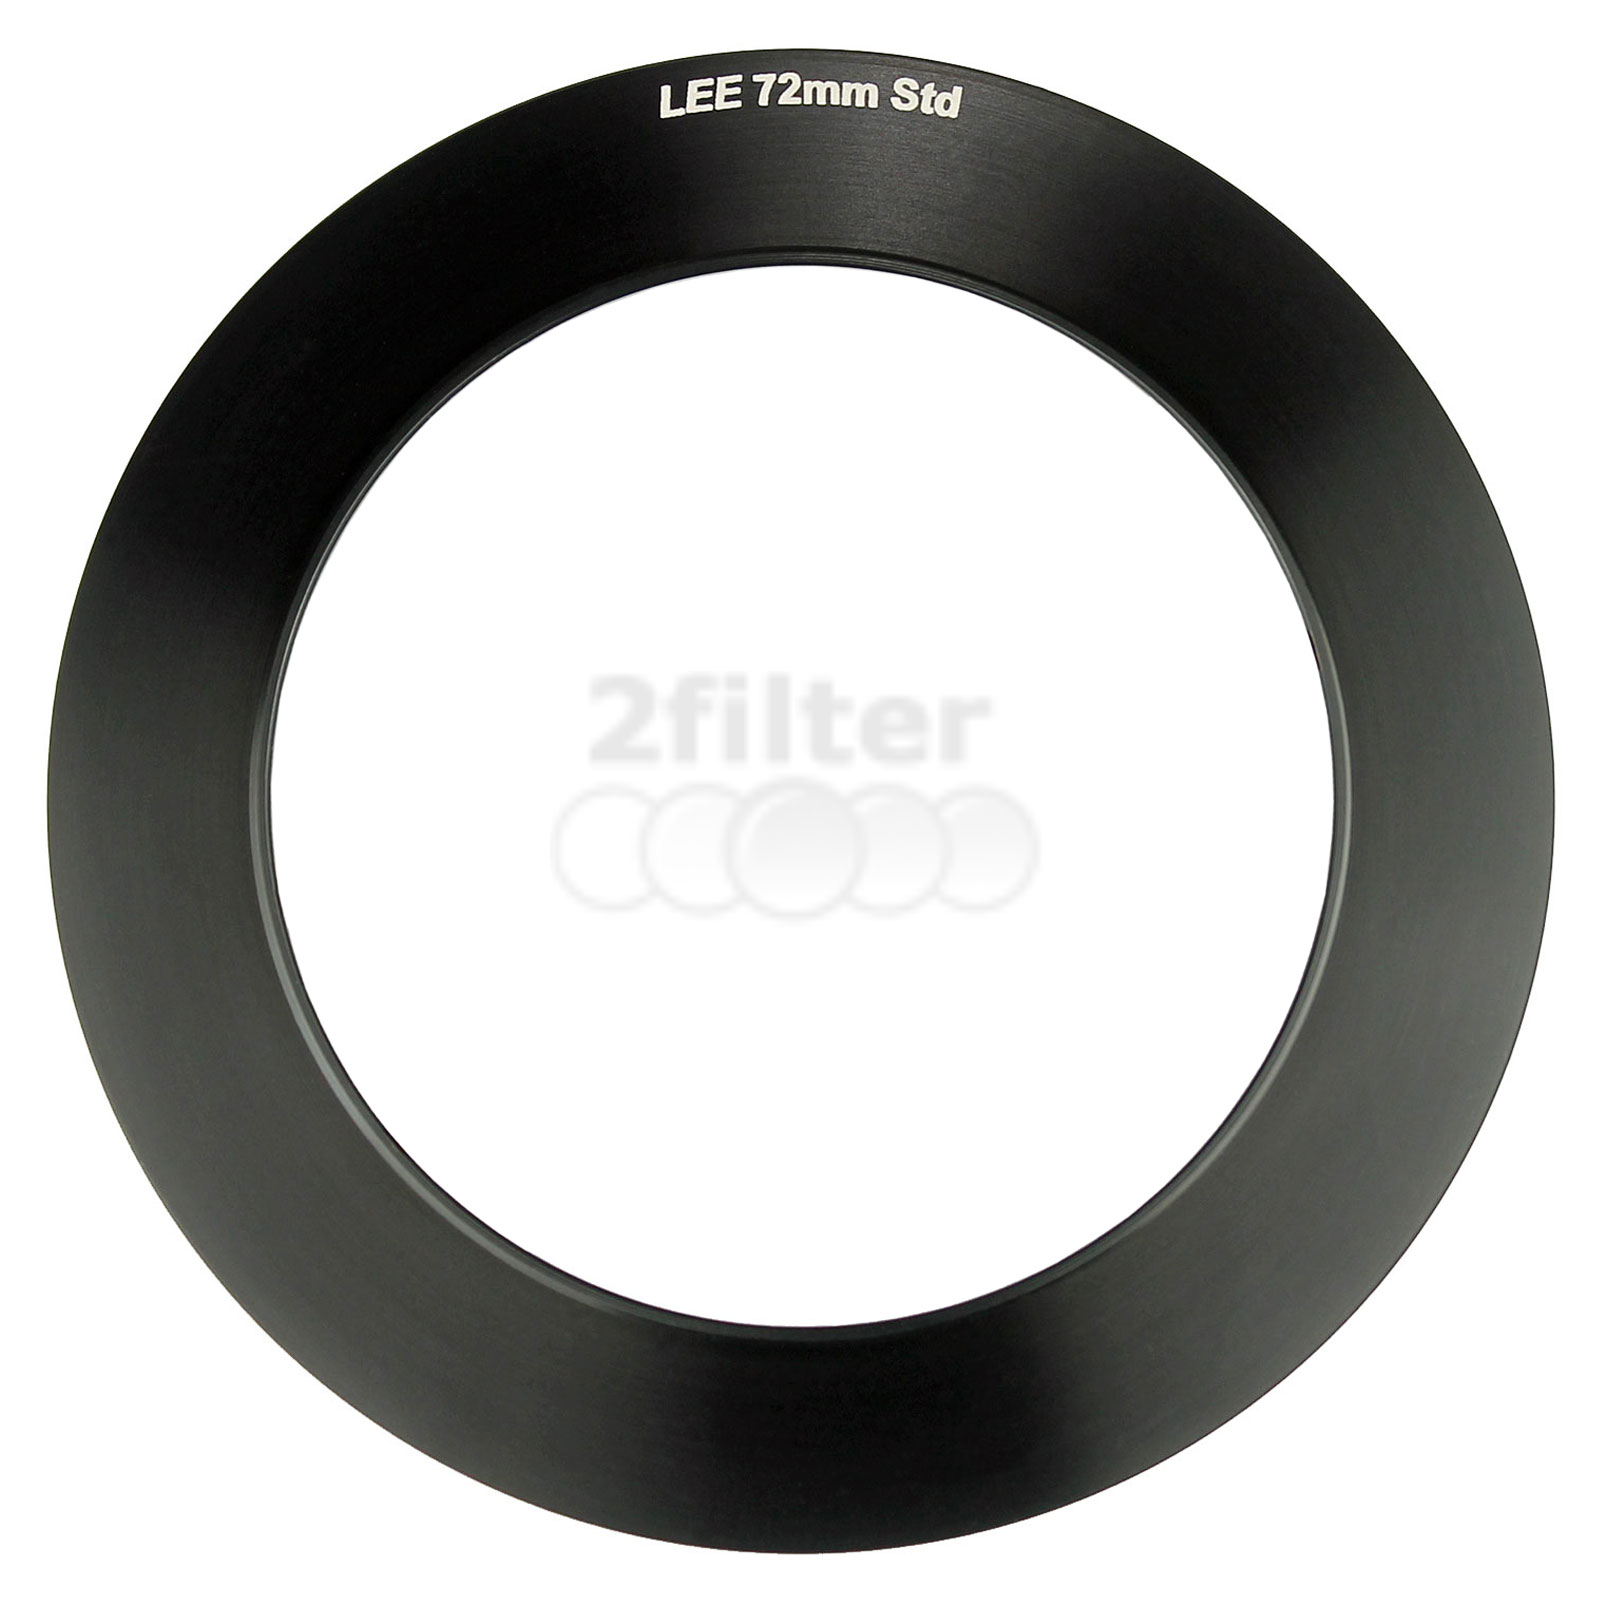 Lee Filters 52mm STANDARD Adapter for FOUNDATION KIT. 